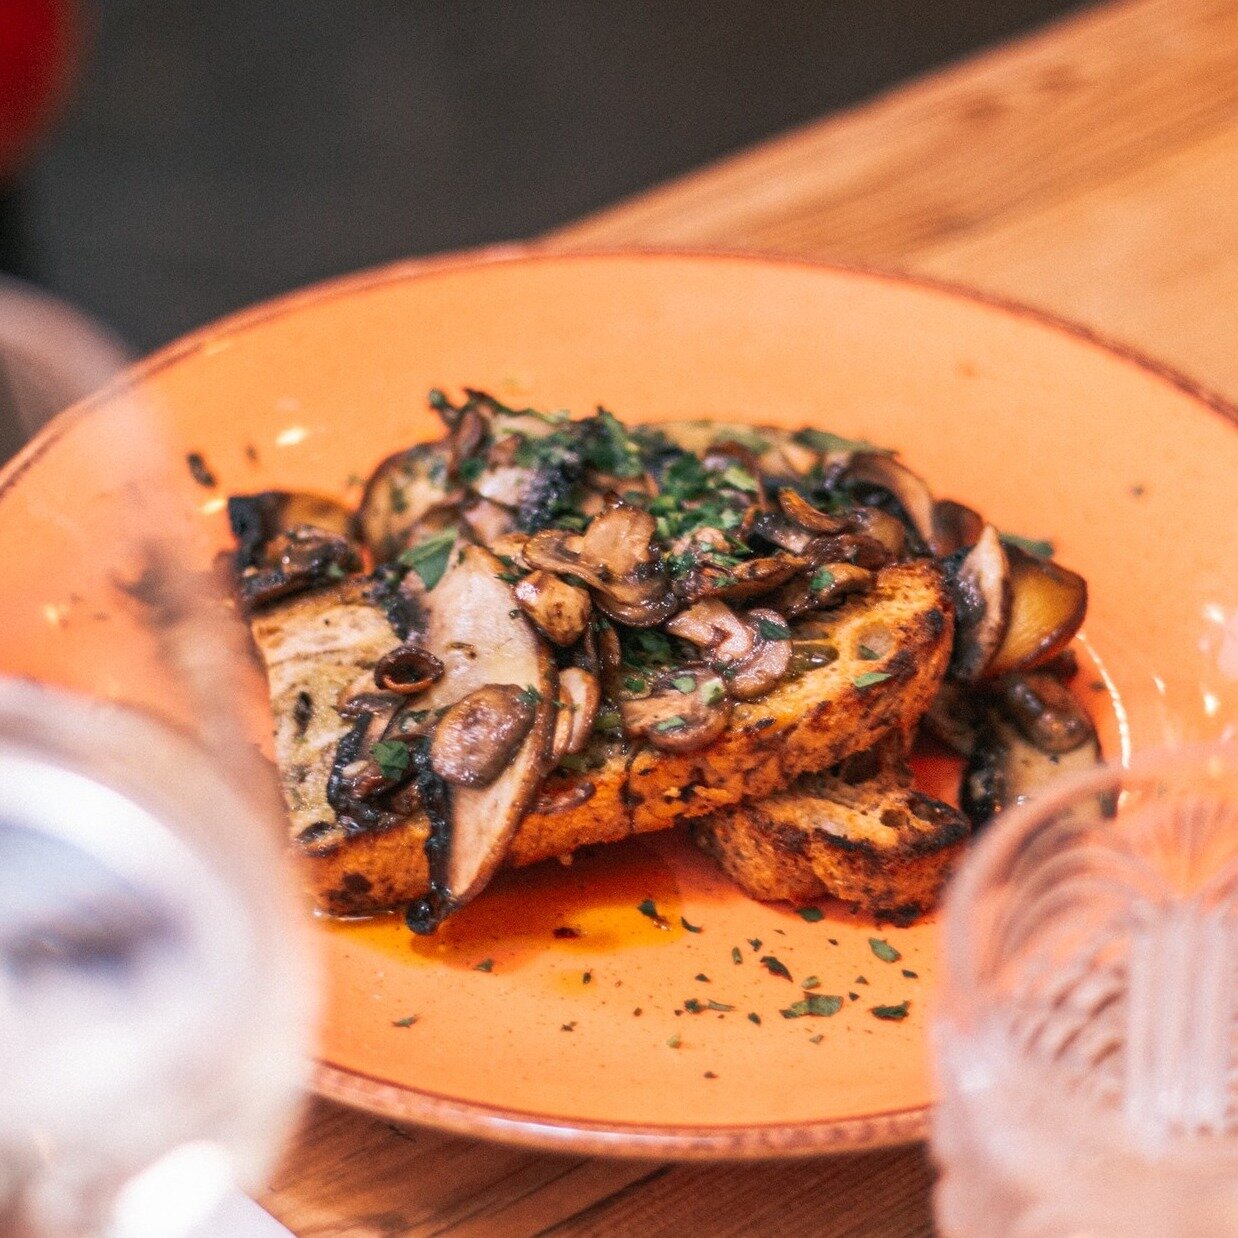 Have you tried our garlic mushroom bruschetta?

Pan fried portobello and cup mushrooms in garlic butter served on homemade bread. It's utterly delicious!

#garliclovers #mushroomlovers #mushroomstarters #garlicstarters #Bruschetta #SimpleElegance #tr